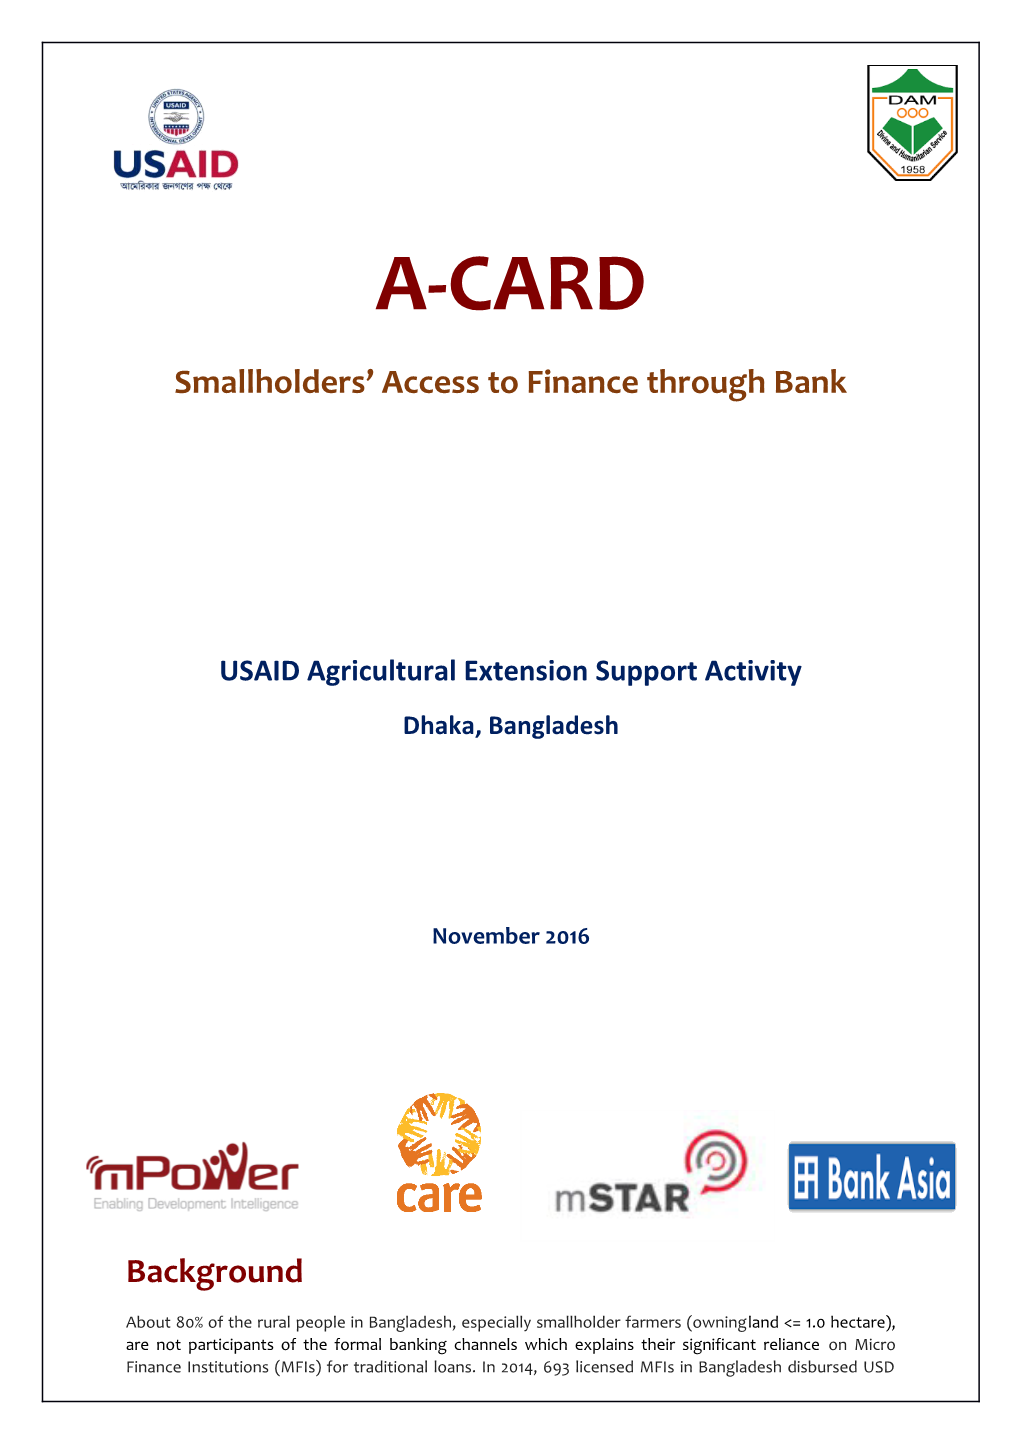 Smallholders Access to Finance Through Bank